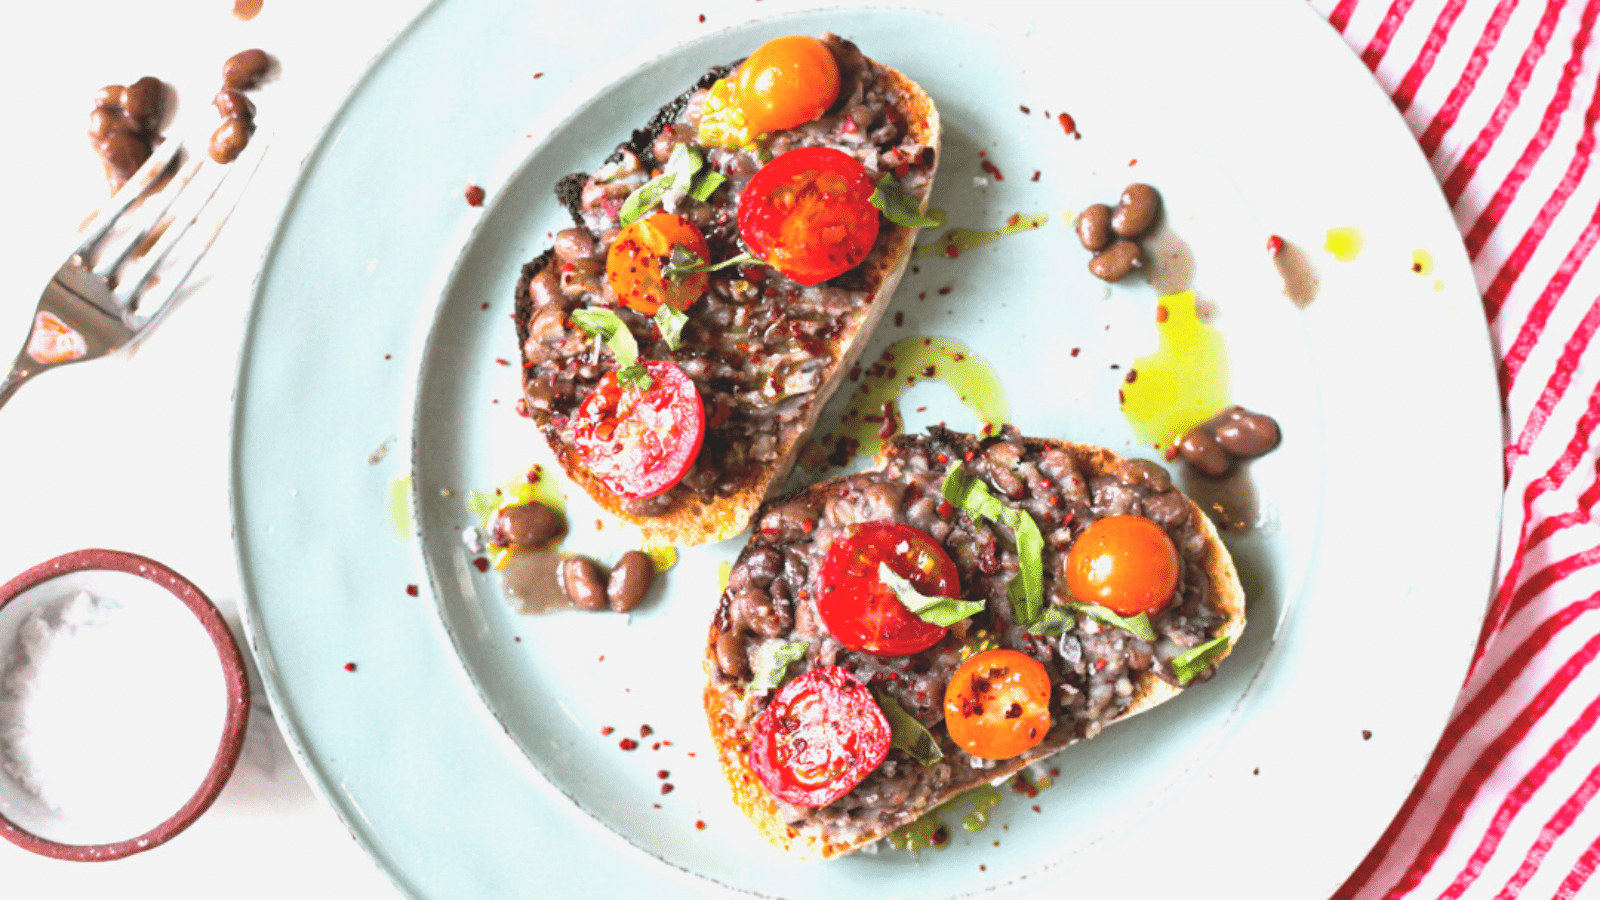 Beans On Toast - Eat Beans Every Day For Health